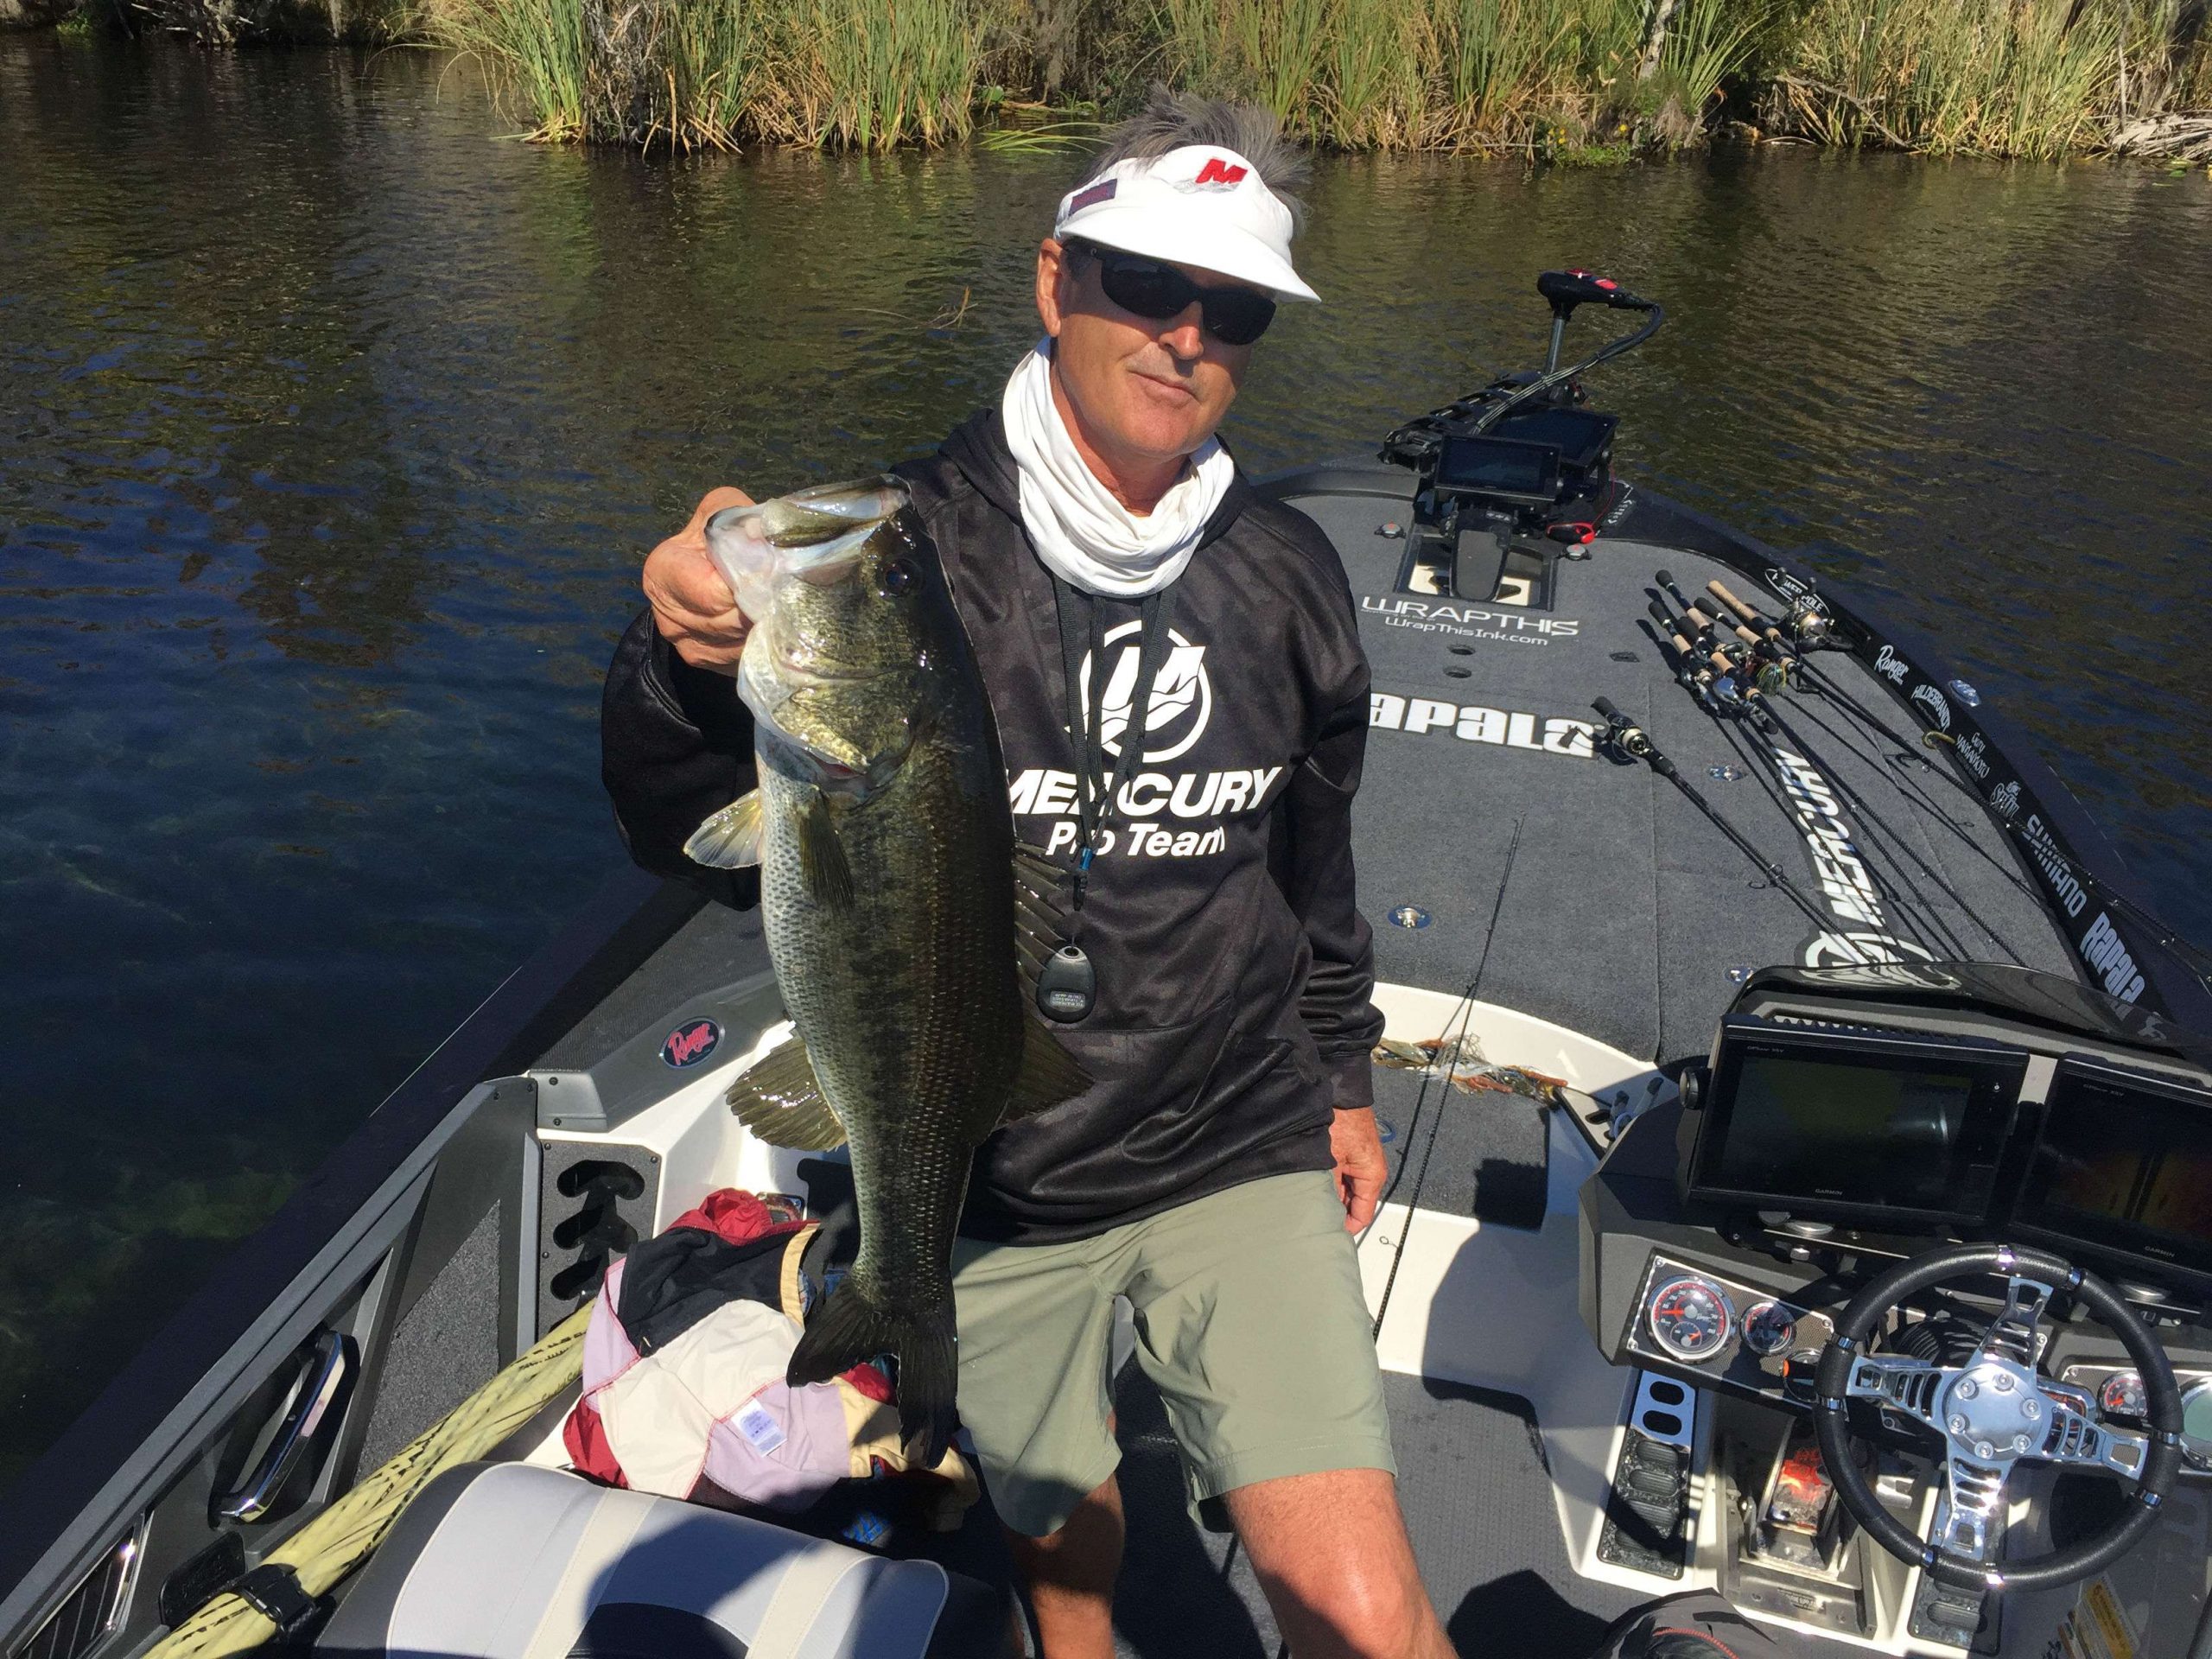 Bernie Schultz has worked this bass two hours.  He found the sweet spot on the bed and it was lights out . Got it to the boat on light line so it was quite nerve wracking.